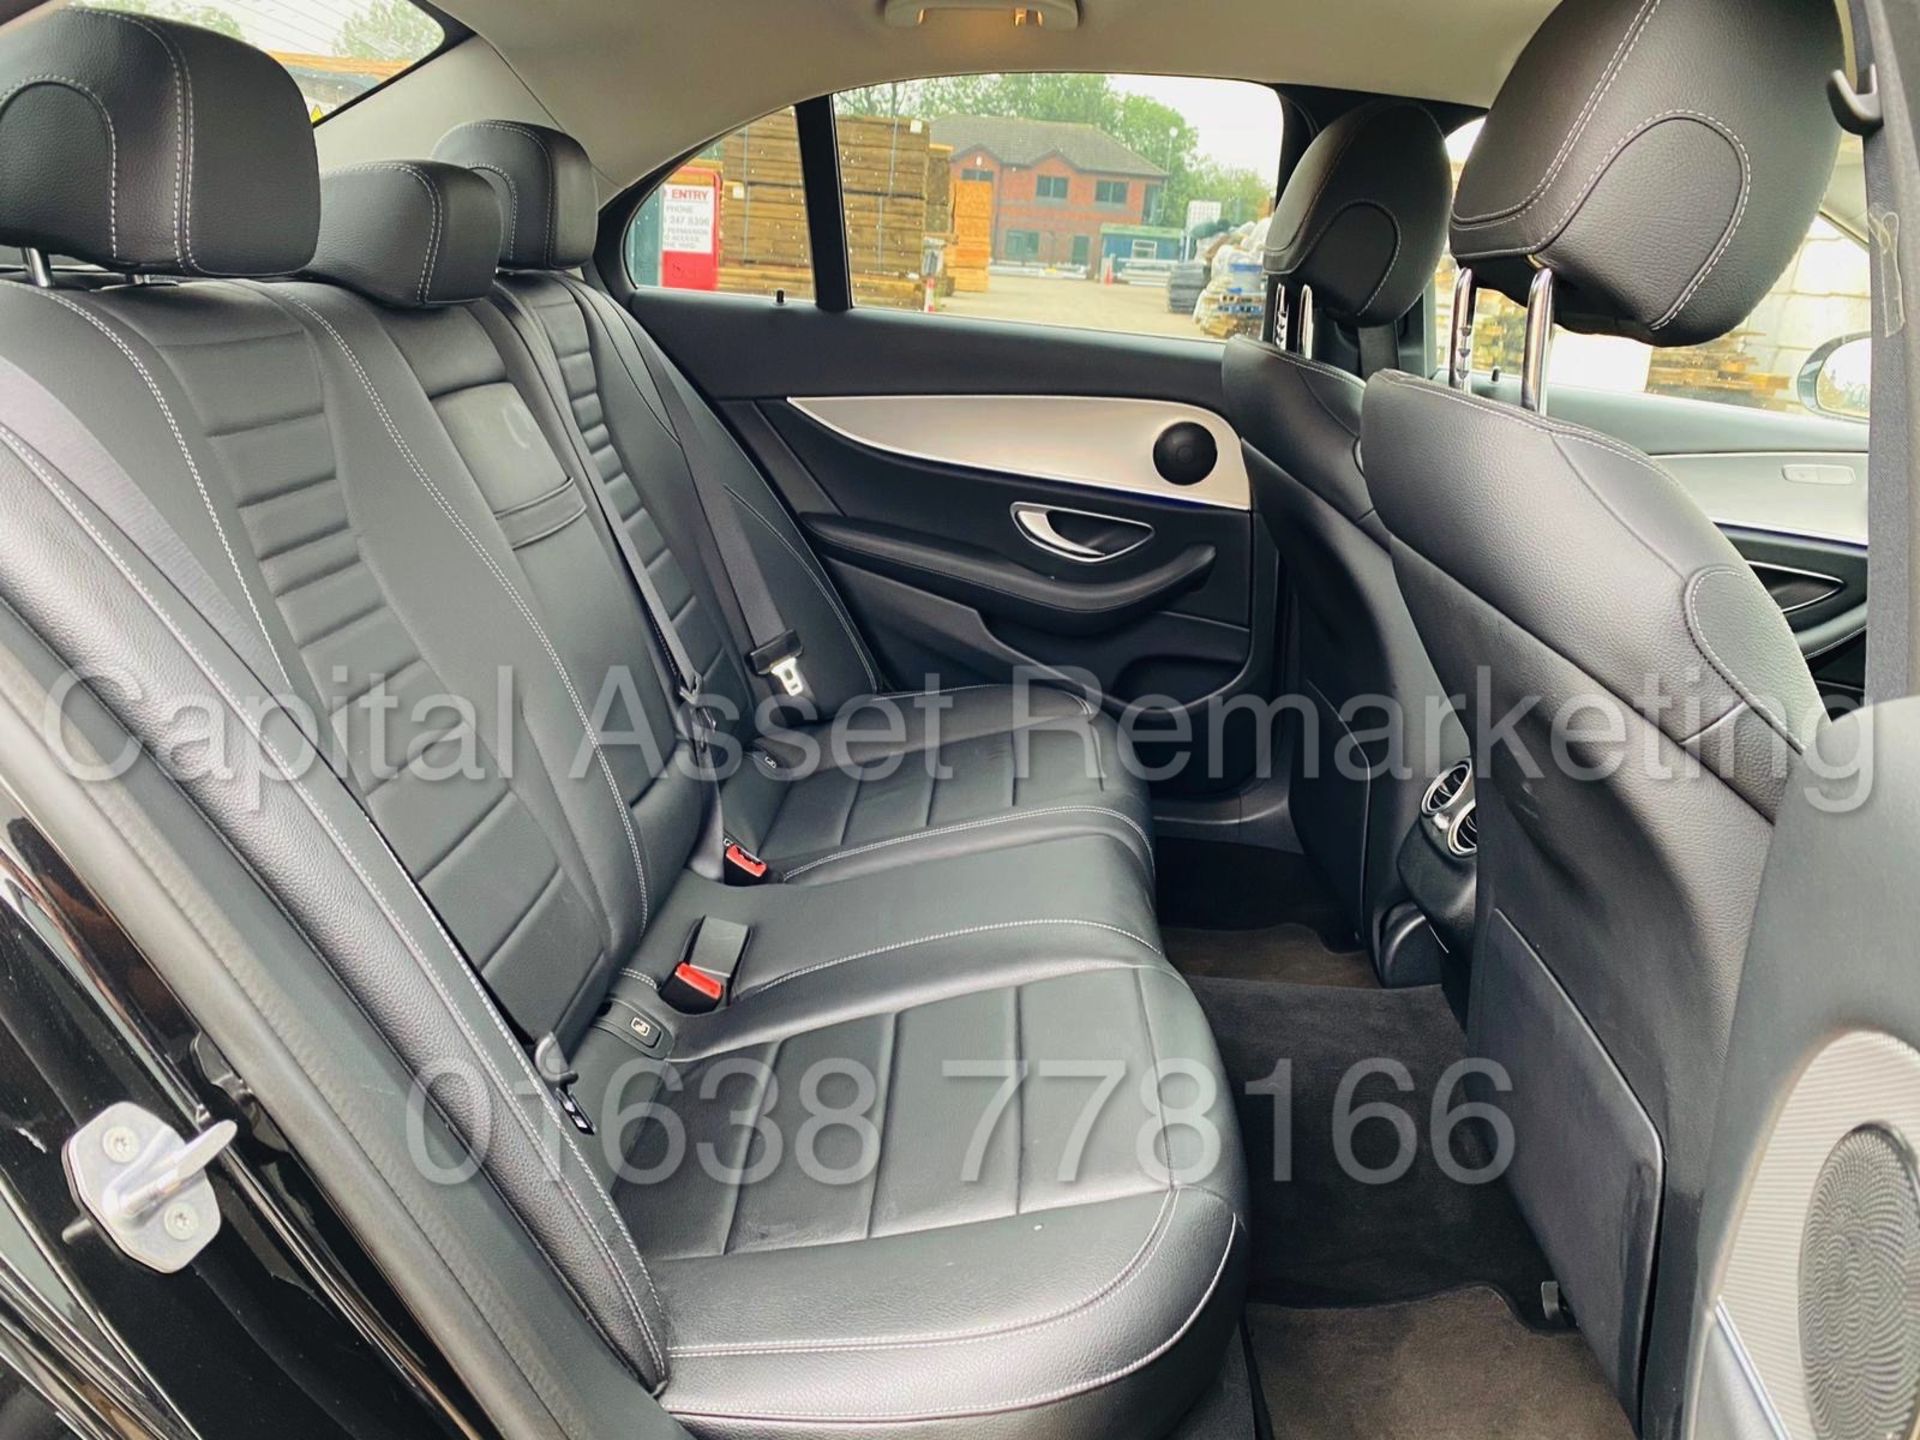 (ON SALE) MERCEDES-BENZ E220D *SALOON* (2018 - NEW MODEL) '9-G TRONIC AUTO - LEATHER - SAT NAV' - Image 33 of 52